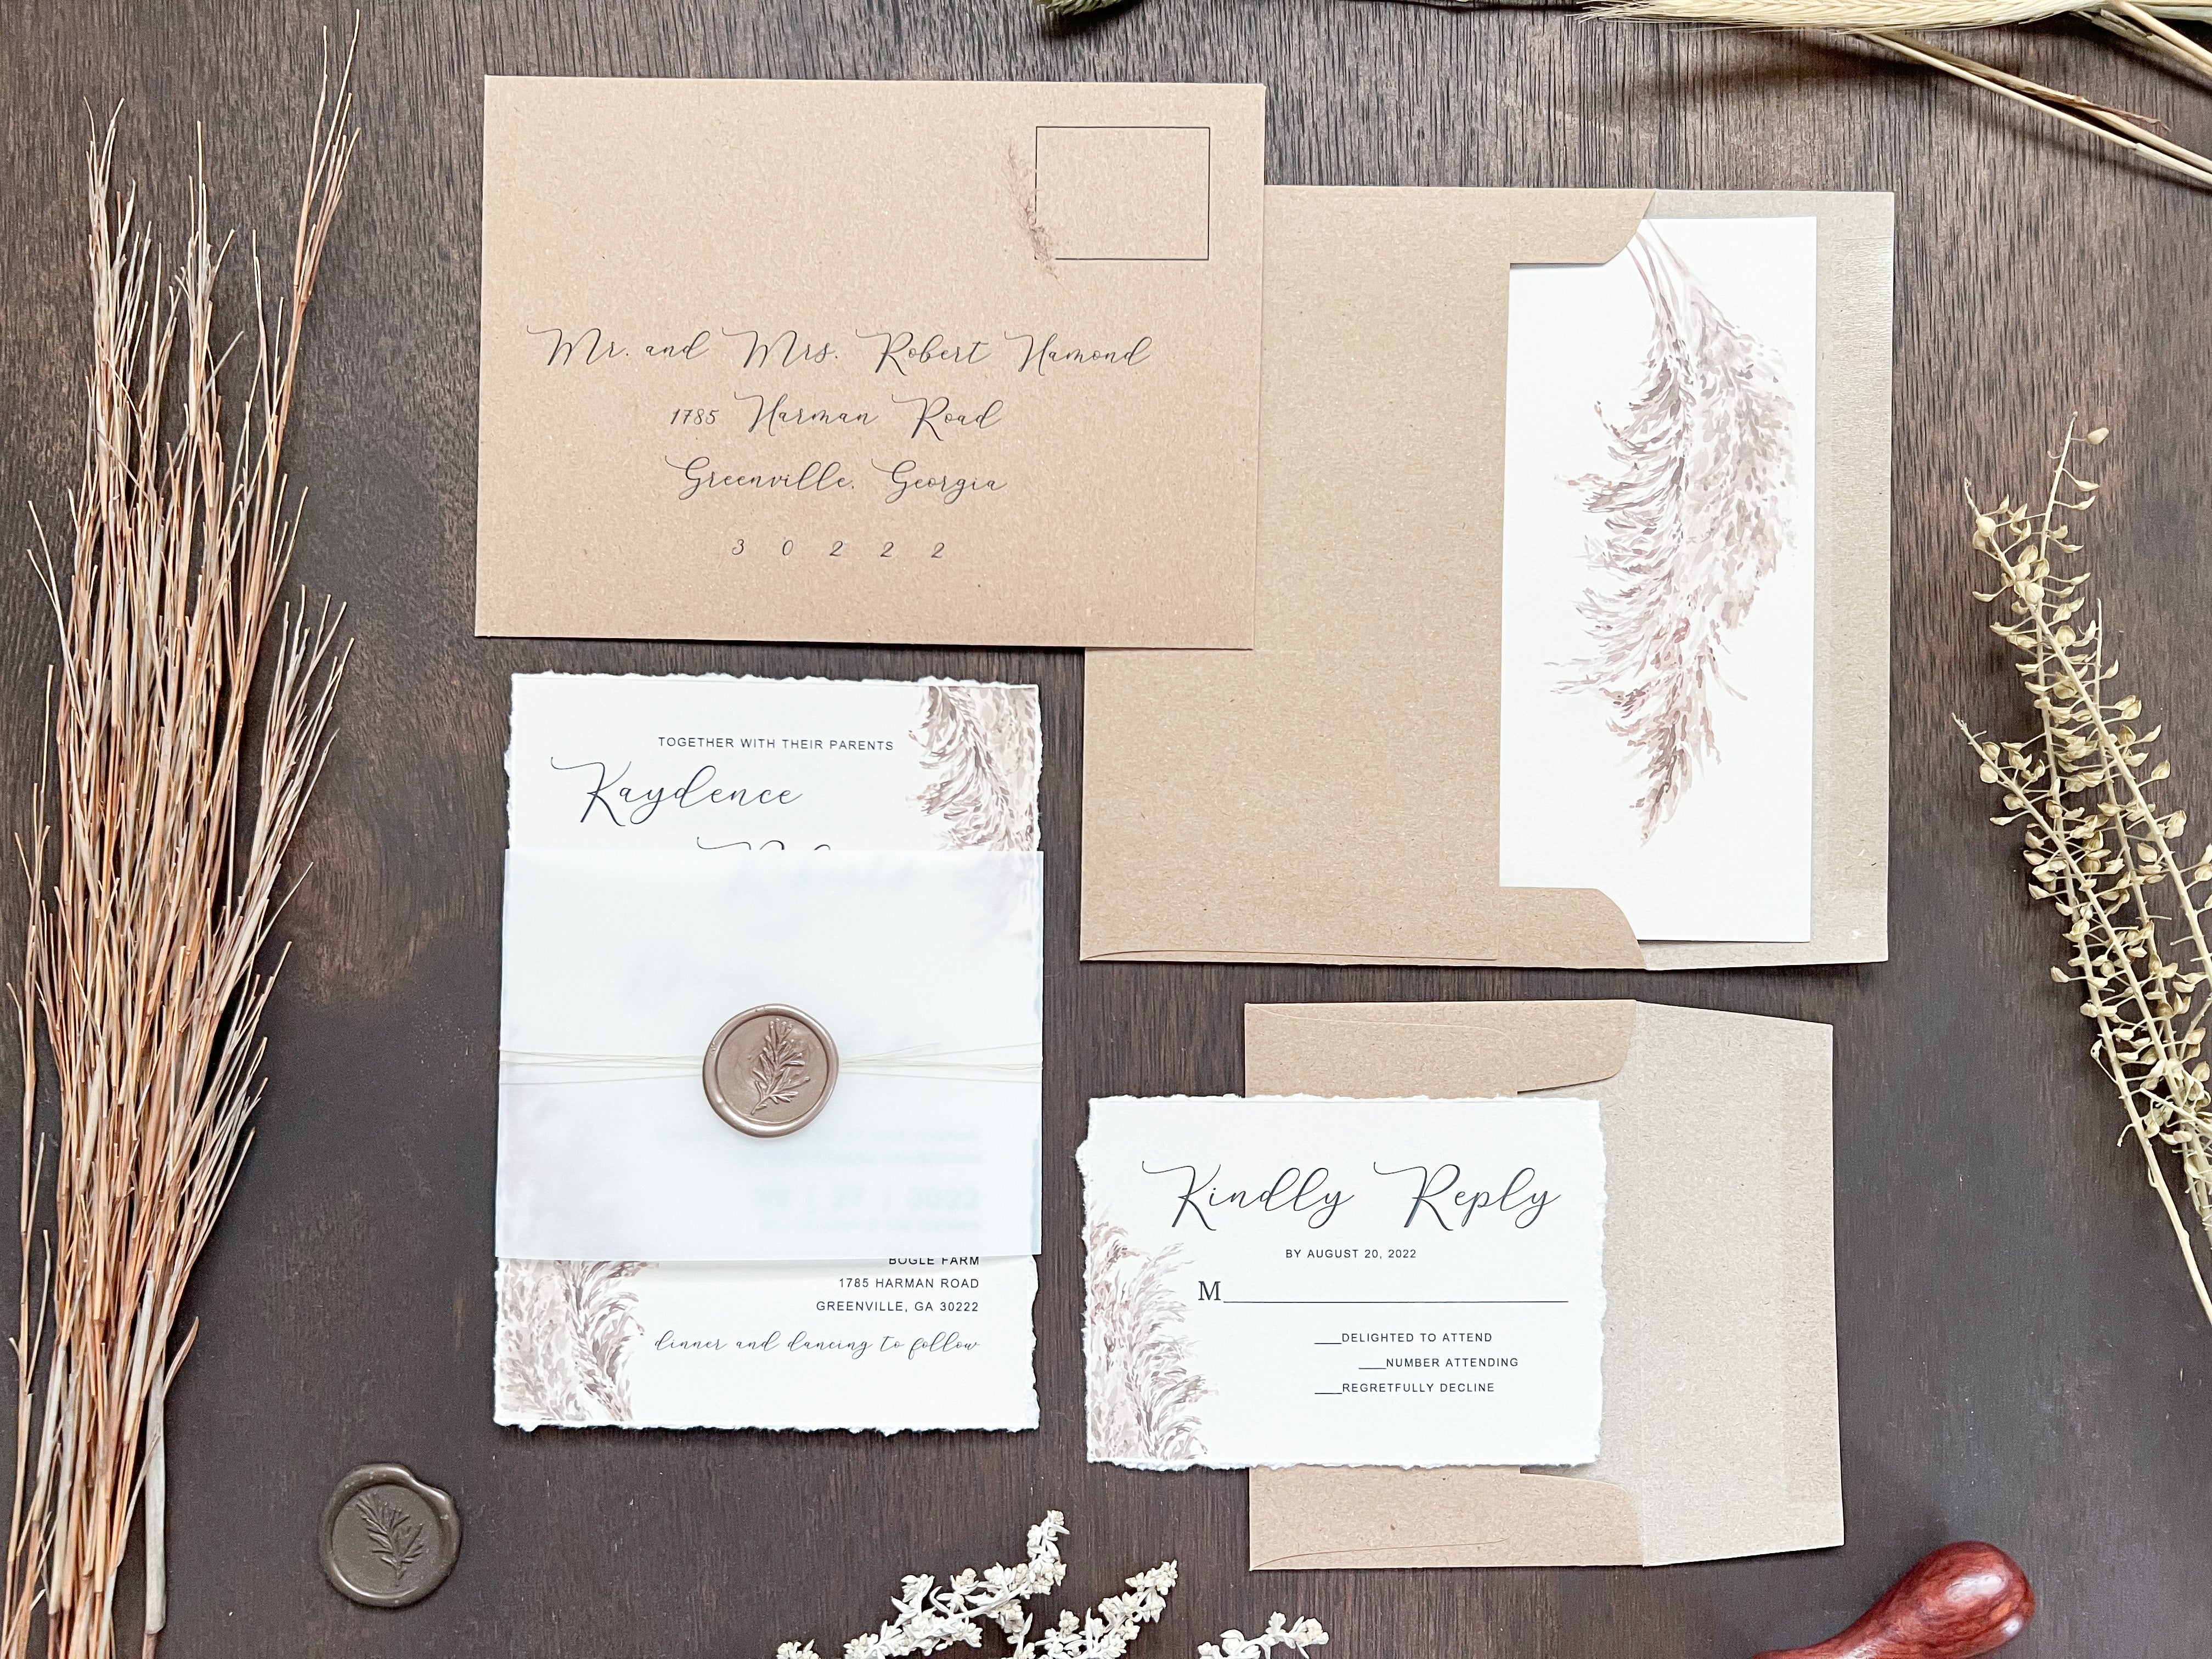 Pampas Grass Boho Wedding Invitation with Deckled Edging, Vellum Belly Band, Wax Seal and Thread